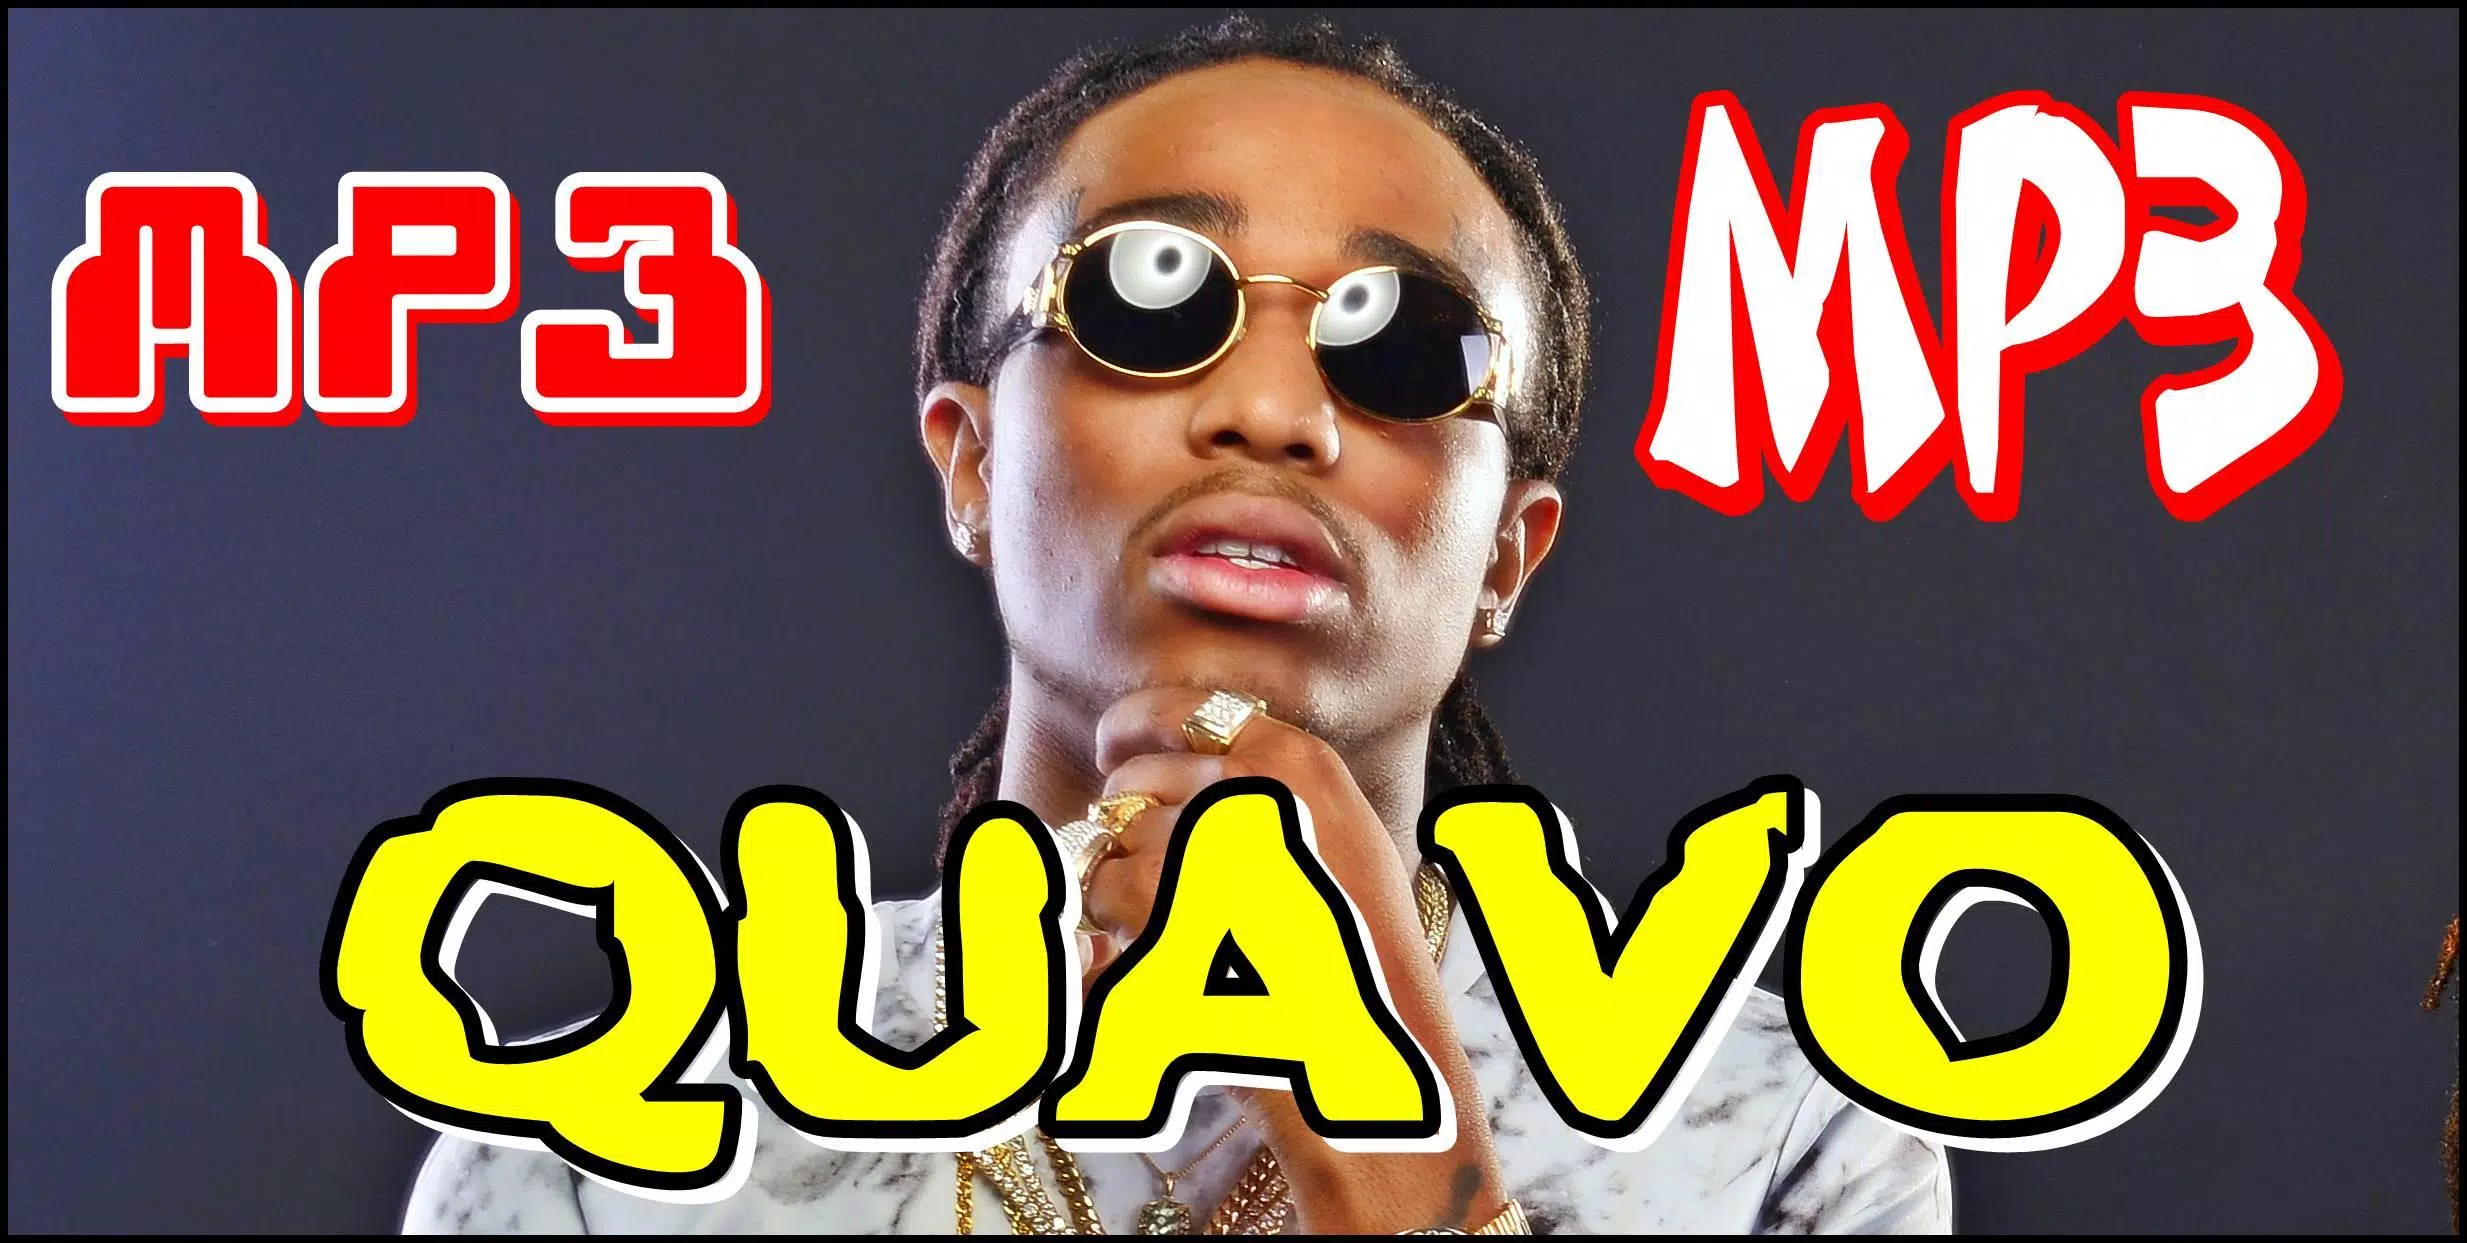 Quavo Without you mp3 Download